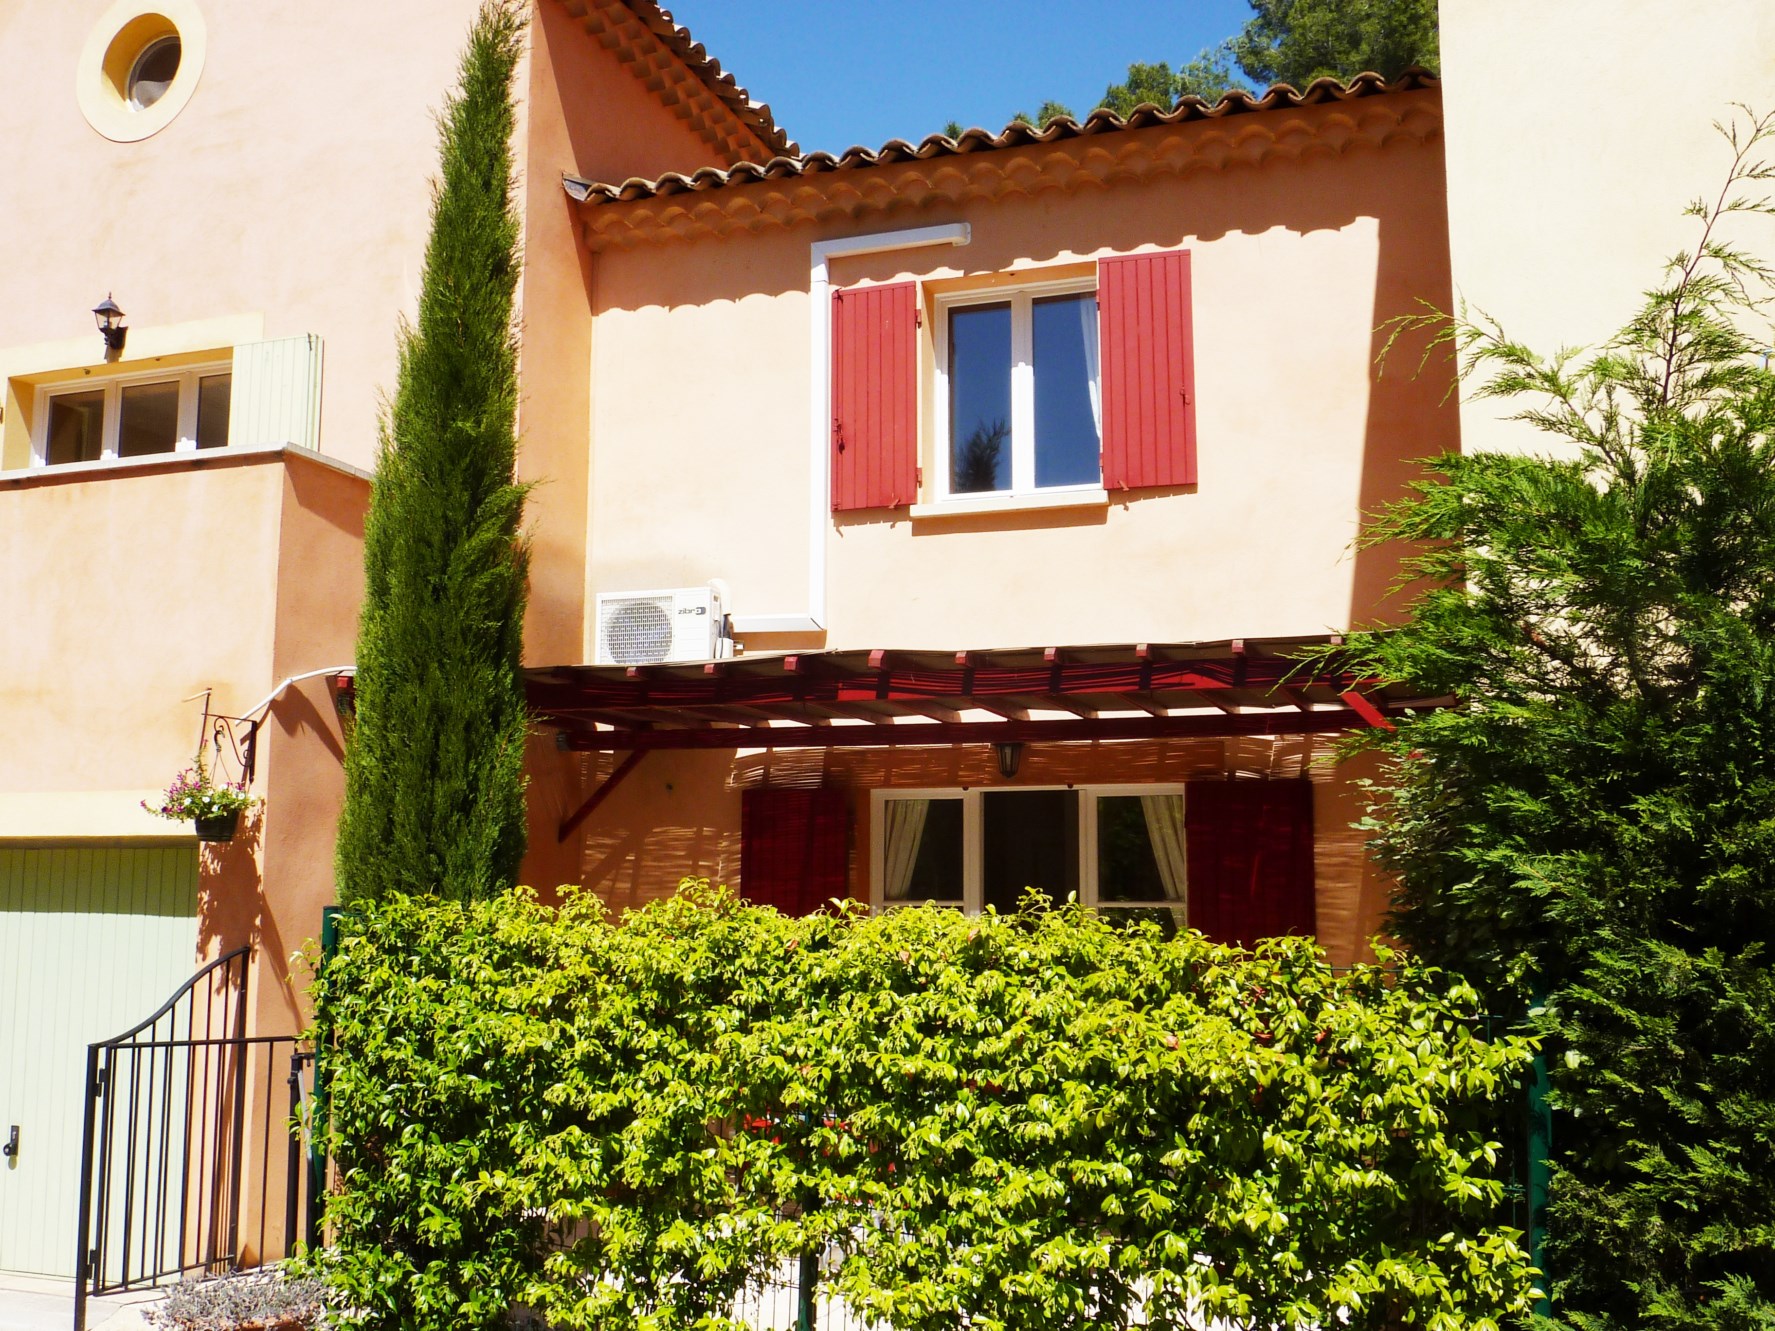 For sale near Roussillon, charming house with terrace and garage in a small condominium